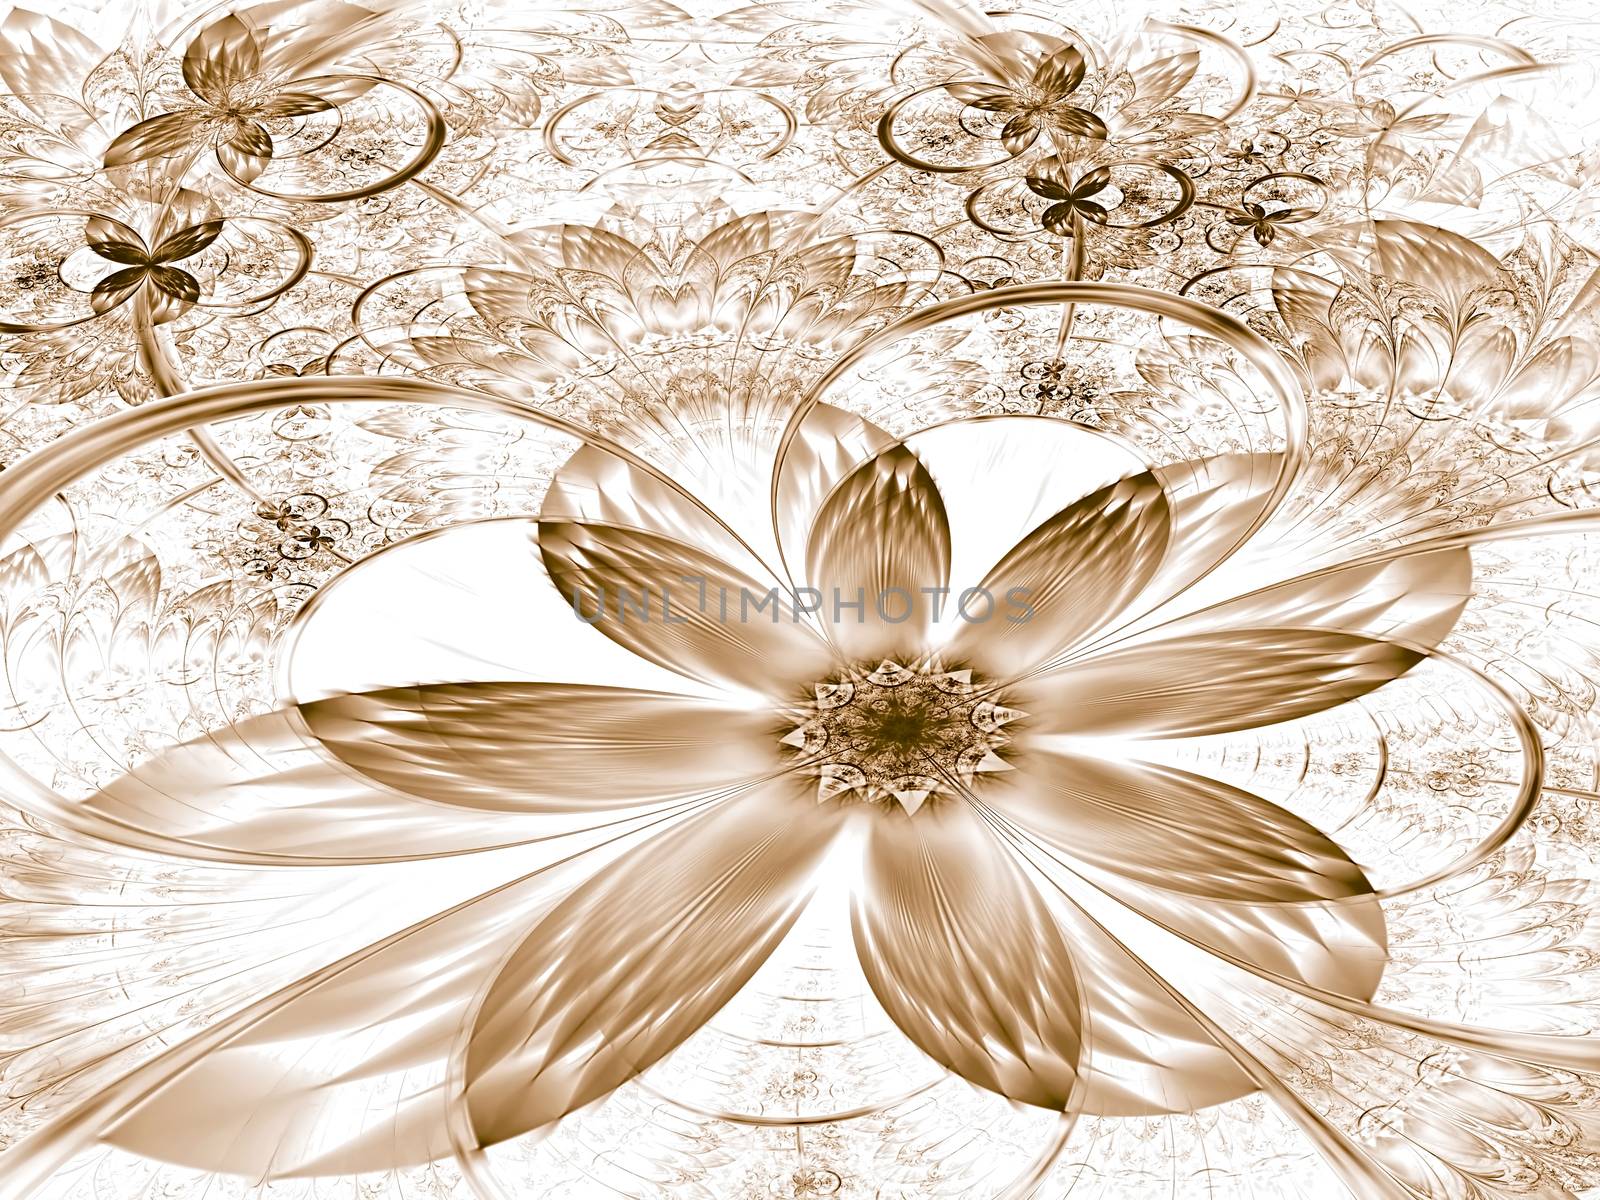 Fractal flower - abstract computer-generated image. Digital art: unusual mystery flower with textured petals on a background with intricate patterns. For cards, covers, web design